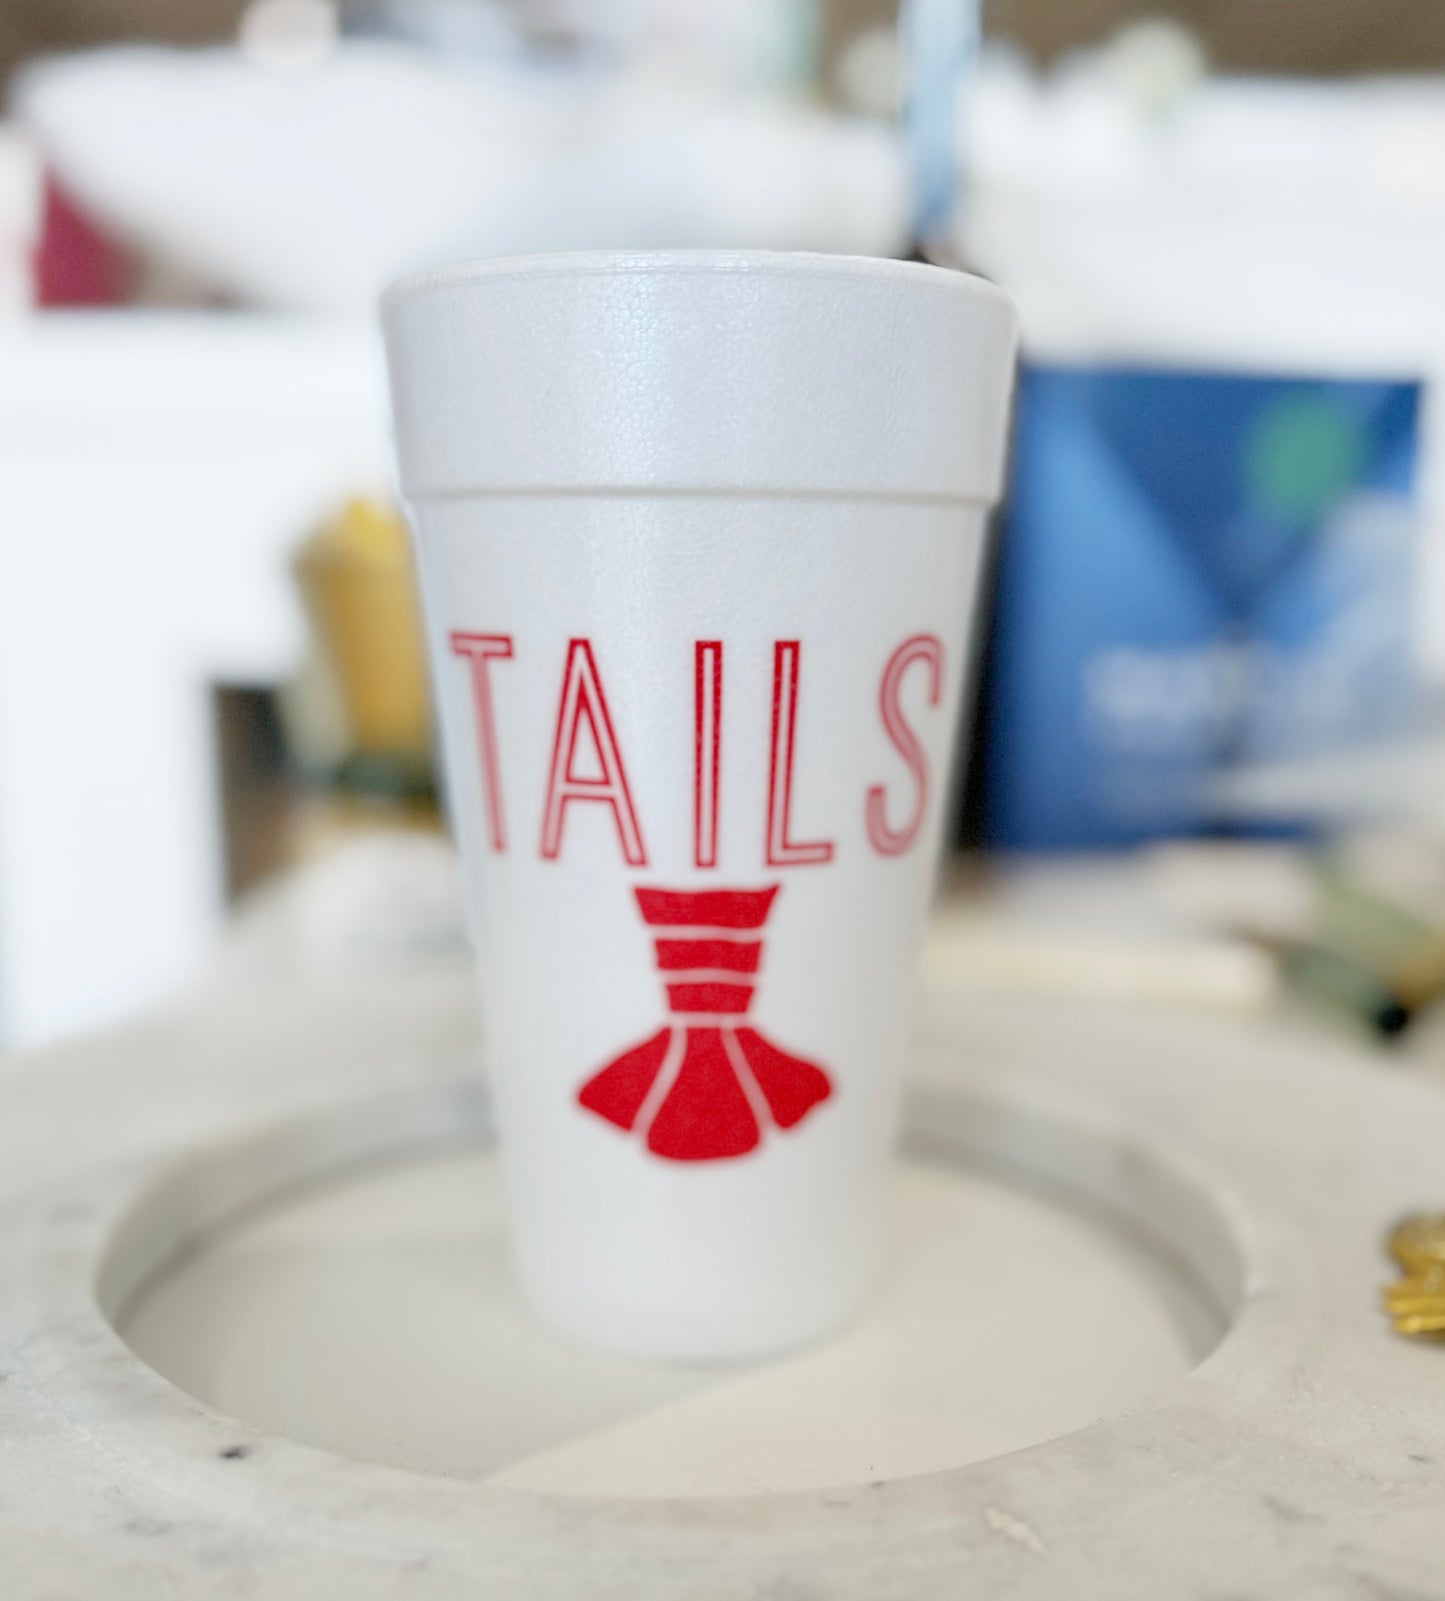 Heads and Tails Styrofoam Cups